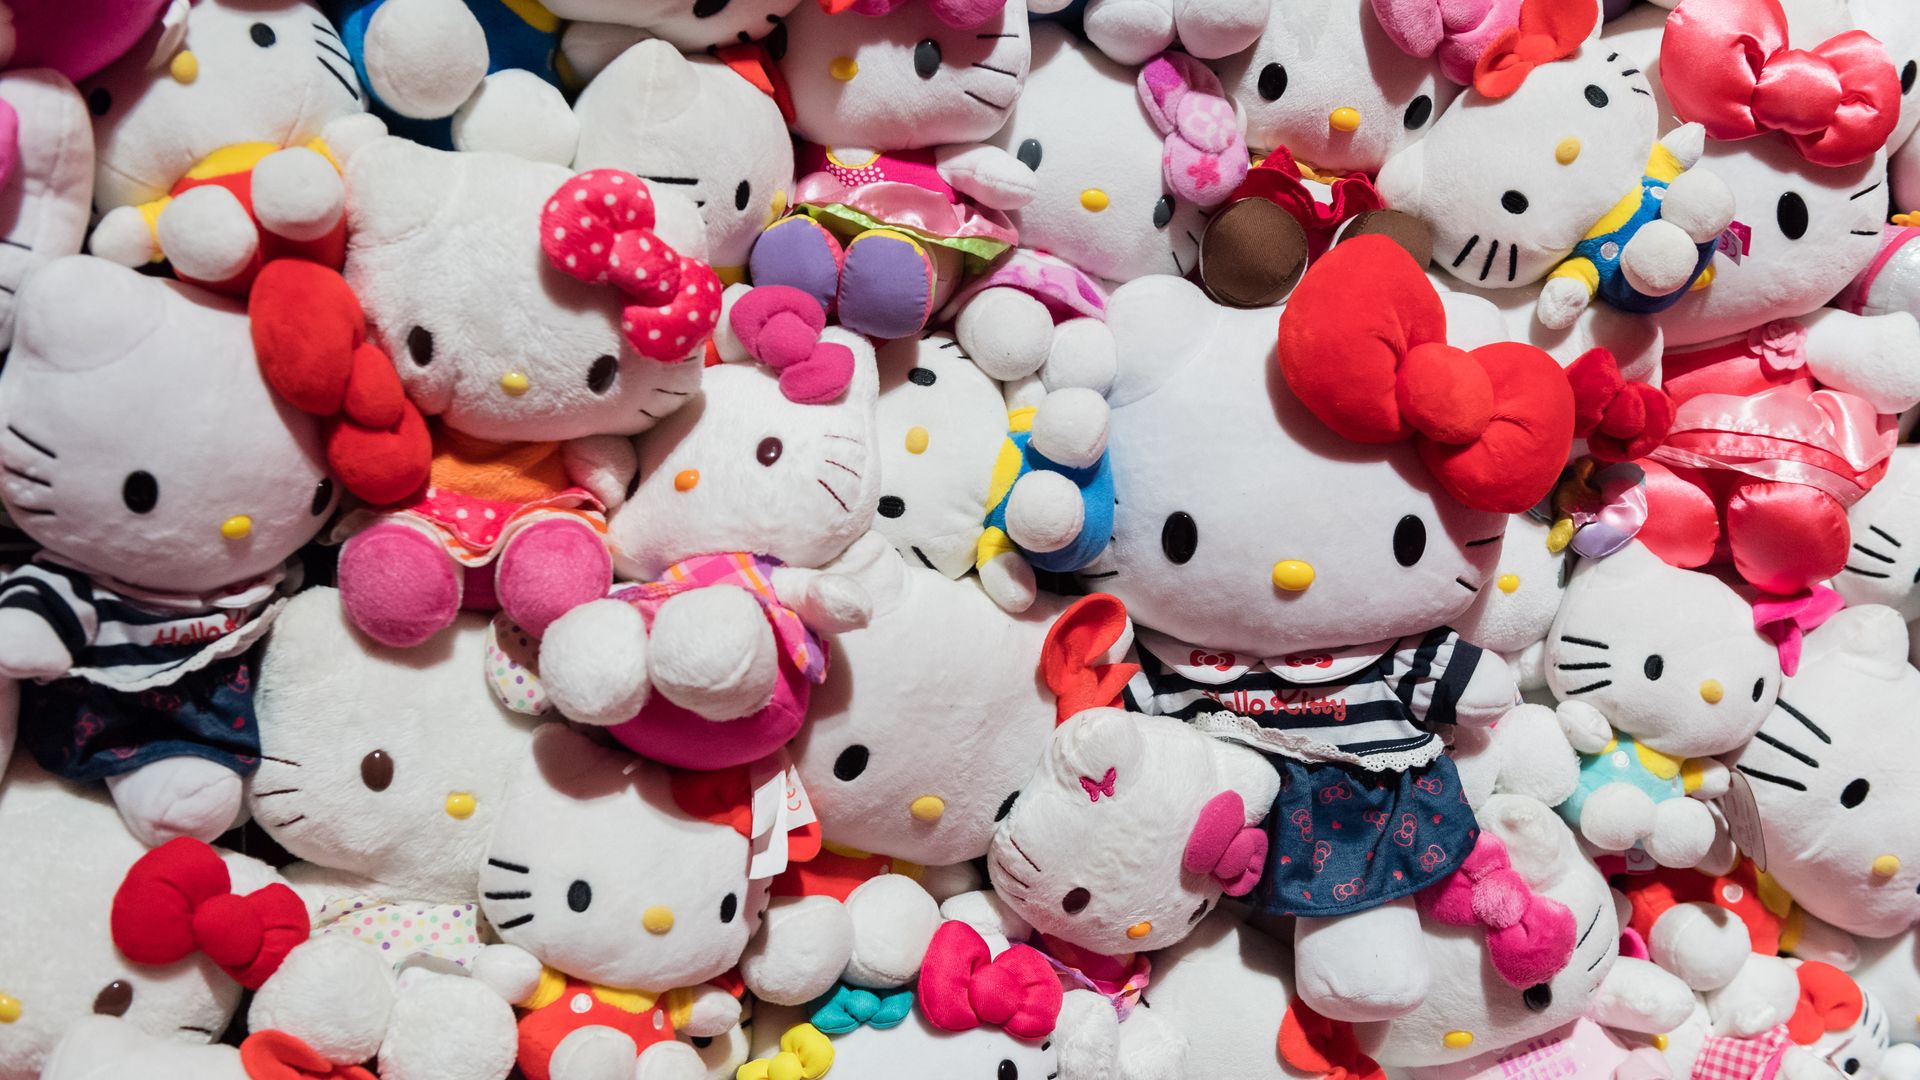 Hello Kitty's true identity shocks fans! The beloved character is not a cat